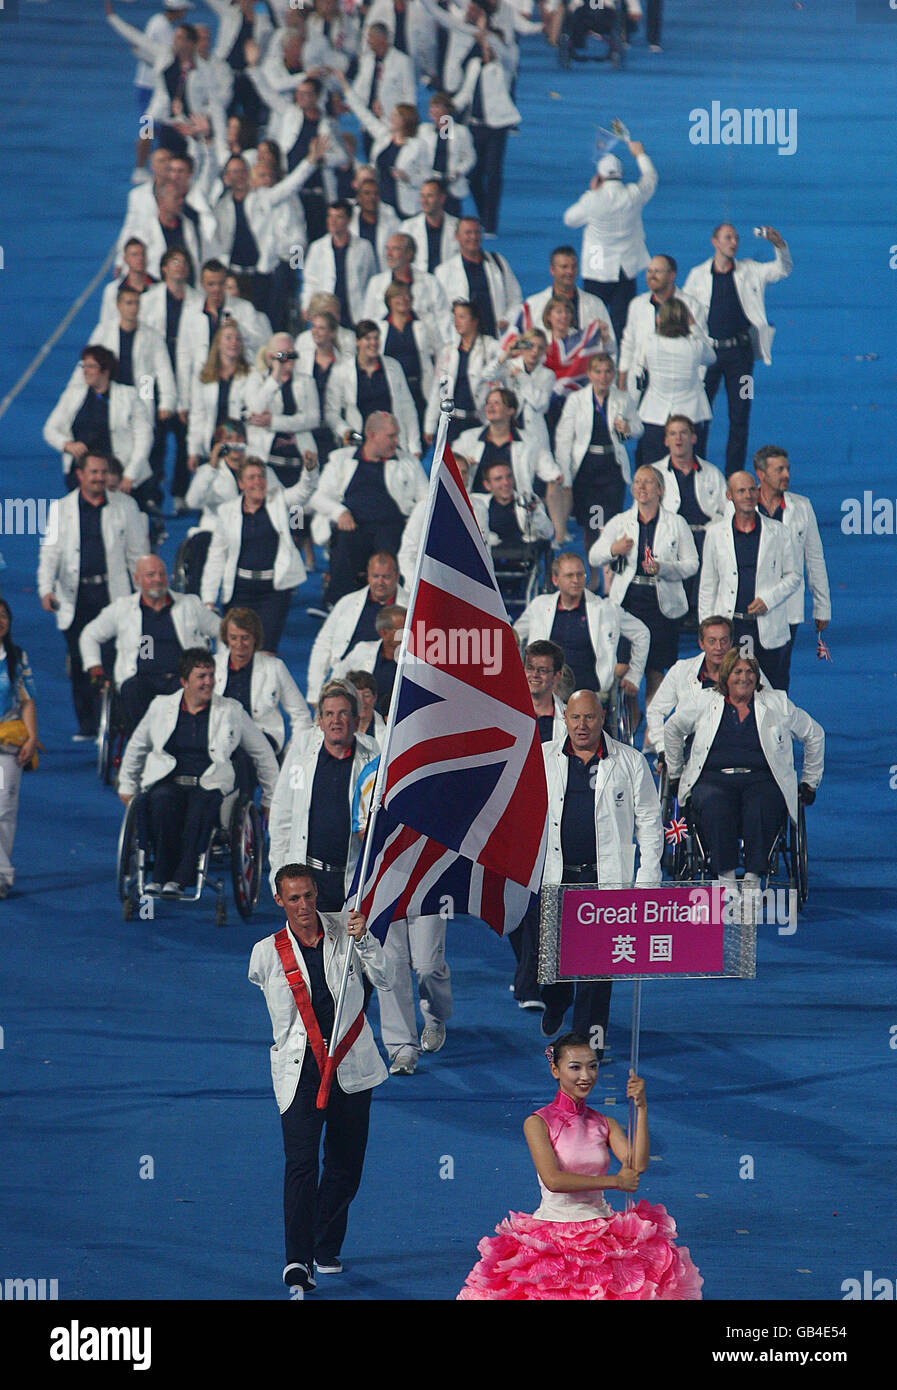 The British Paralympic team is led into the stadium by Daniel Crates during the Beijing Paralympic Games 2008 Opening Ceremony at the National Stadium, Beijing, China. Stock Photo